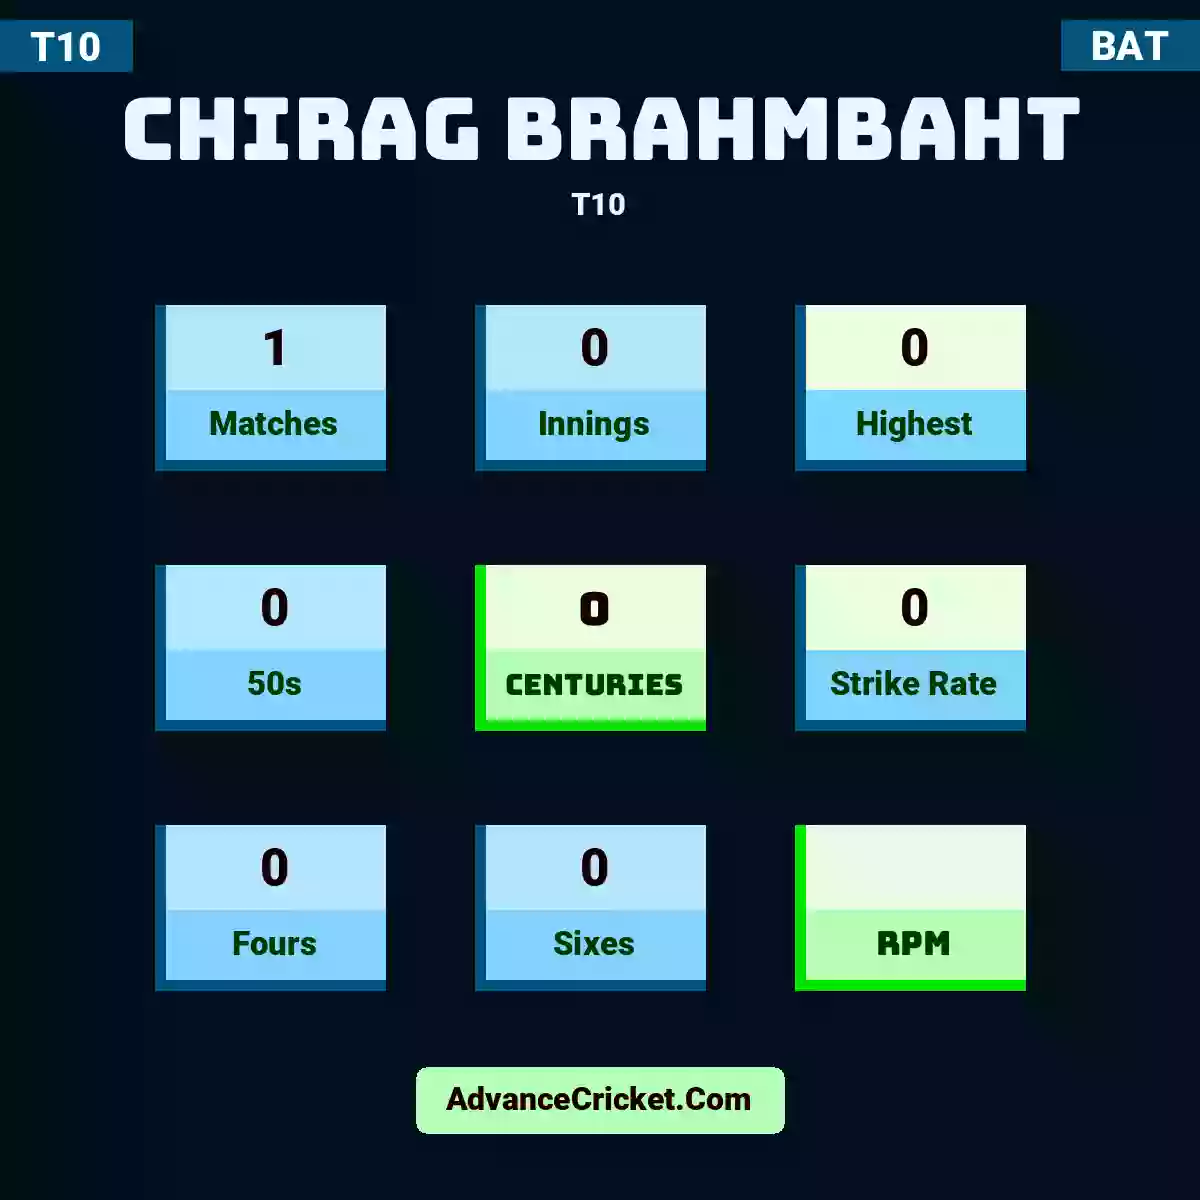 Chirag Brahmbaht T10 , Chirag Brahmbaht played 1 matches, scored 0 runs as highest, 0 half-centuries, and 0 centuries, with a strike rate of 0. C.Brahmbaht hit 0 fours and 0 sixes.